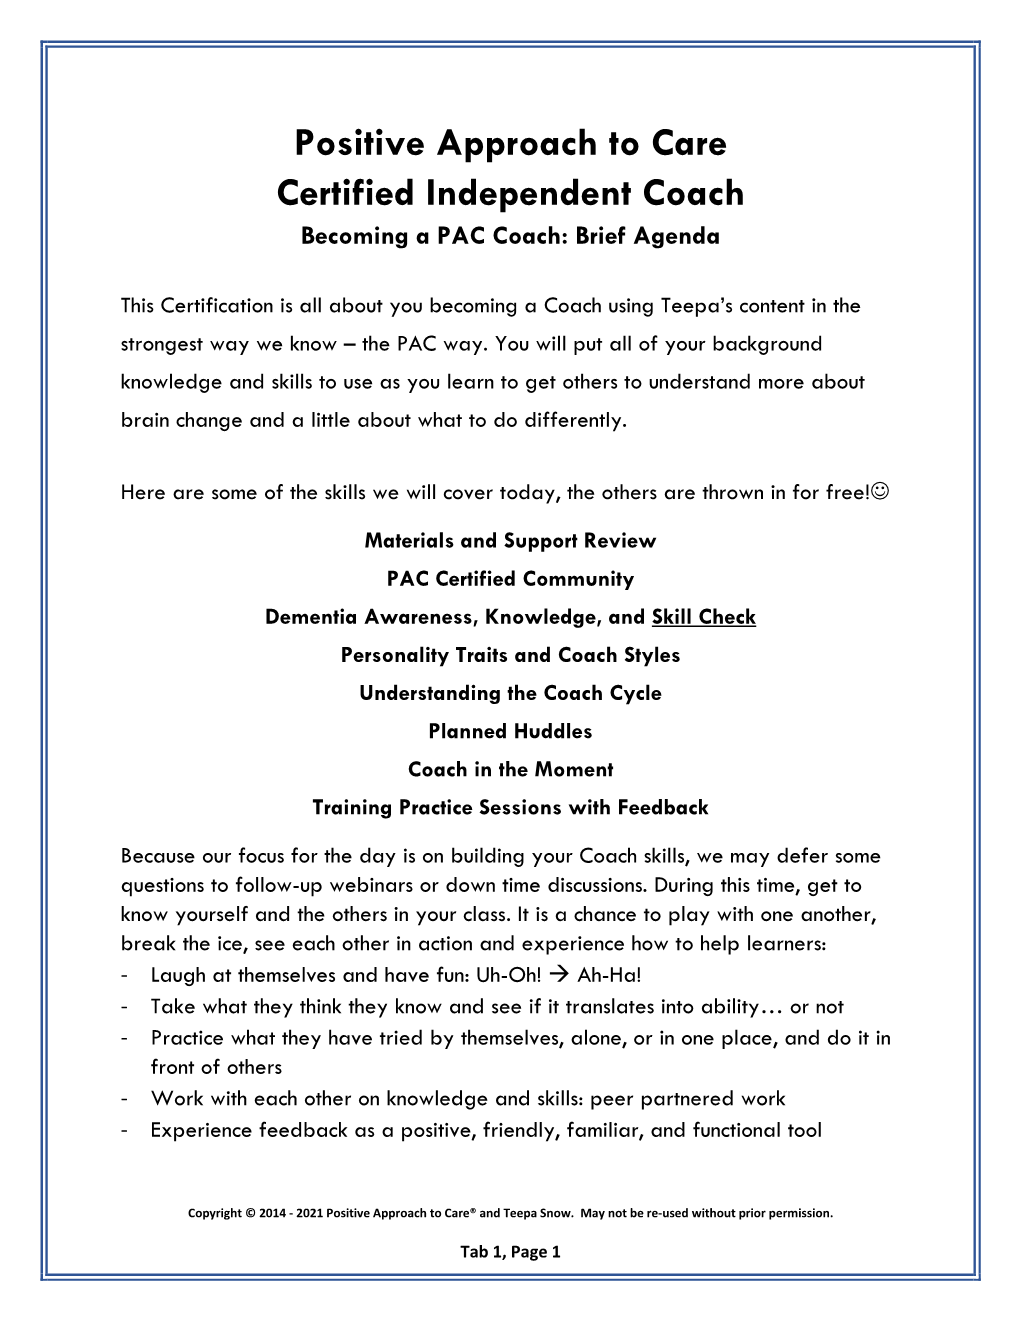 Positive Approach to Care Certified Independent Coach Becoming a PAC Coach: Brief Agenda